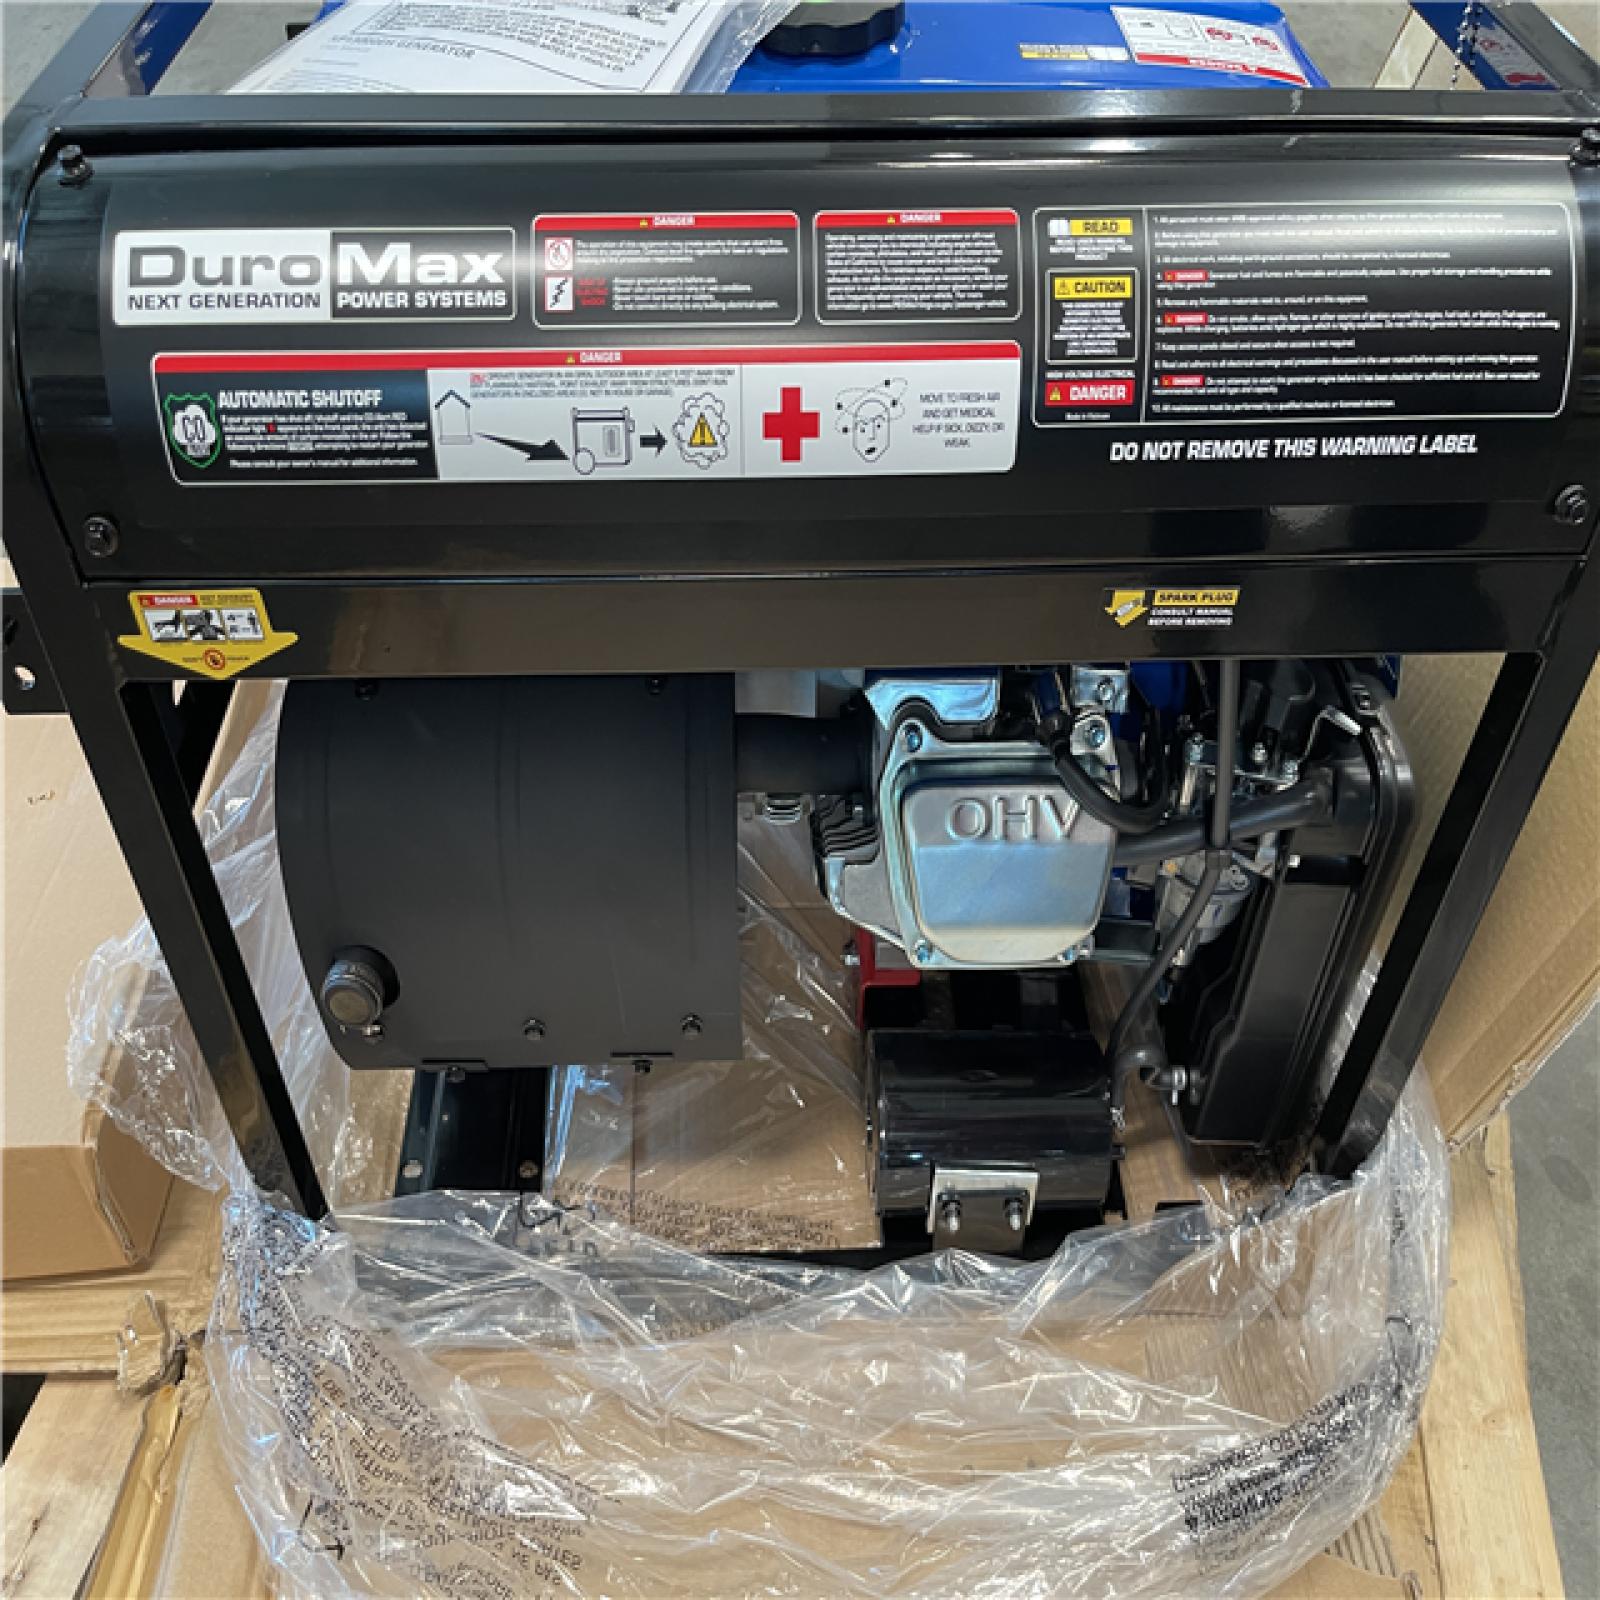 California AS-IS DuroMax XP13000EH 13000 Watt Portable Hybrid Gas Propane Generator-Appears in EXCELLENT Condition